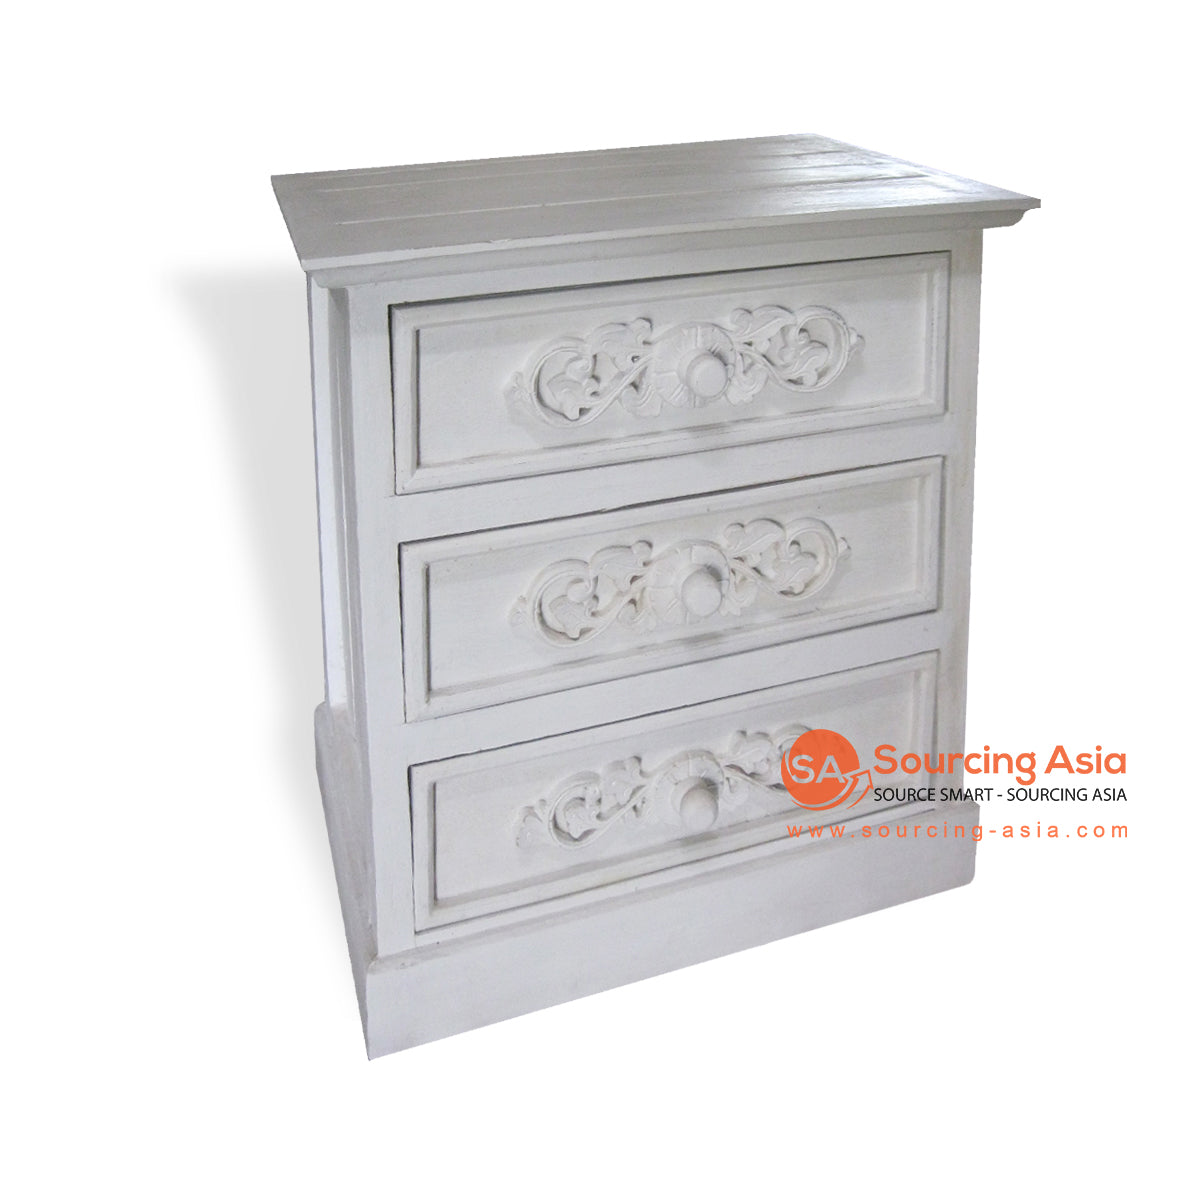 THE037 WHITE WASH WOODEN SIDE TABLE WITH THREE DRAWERS